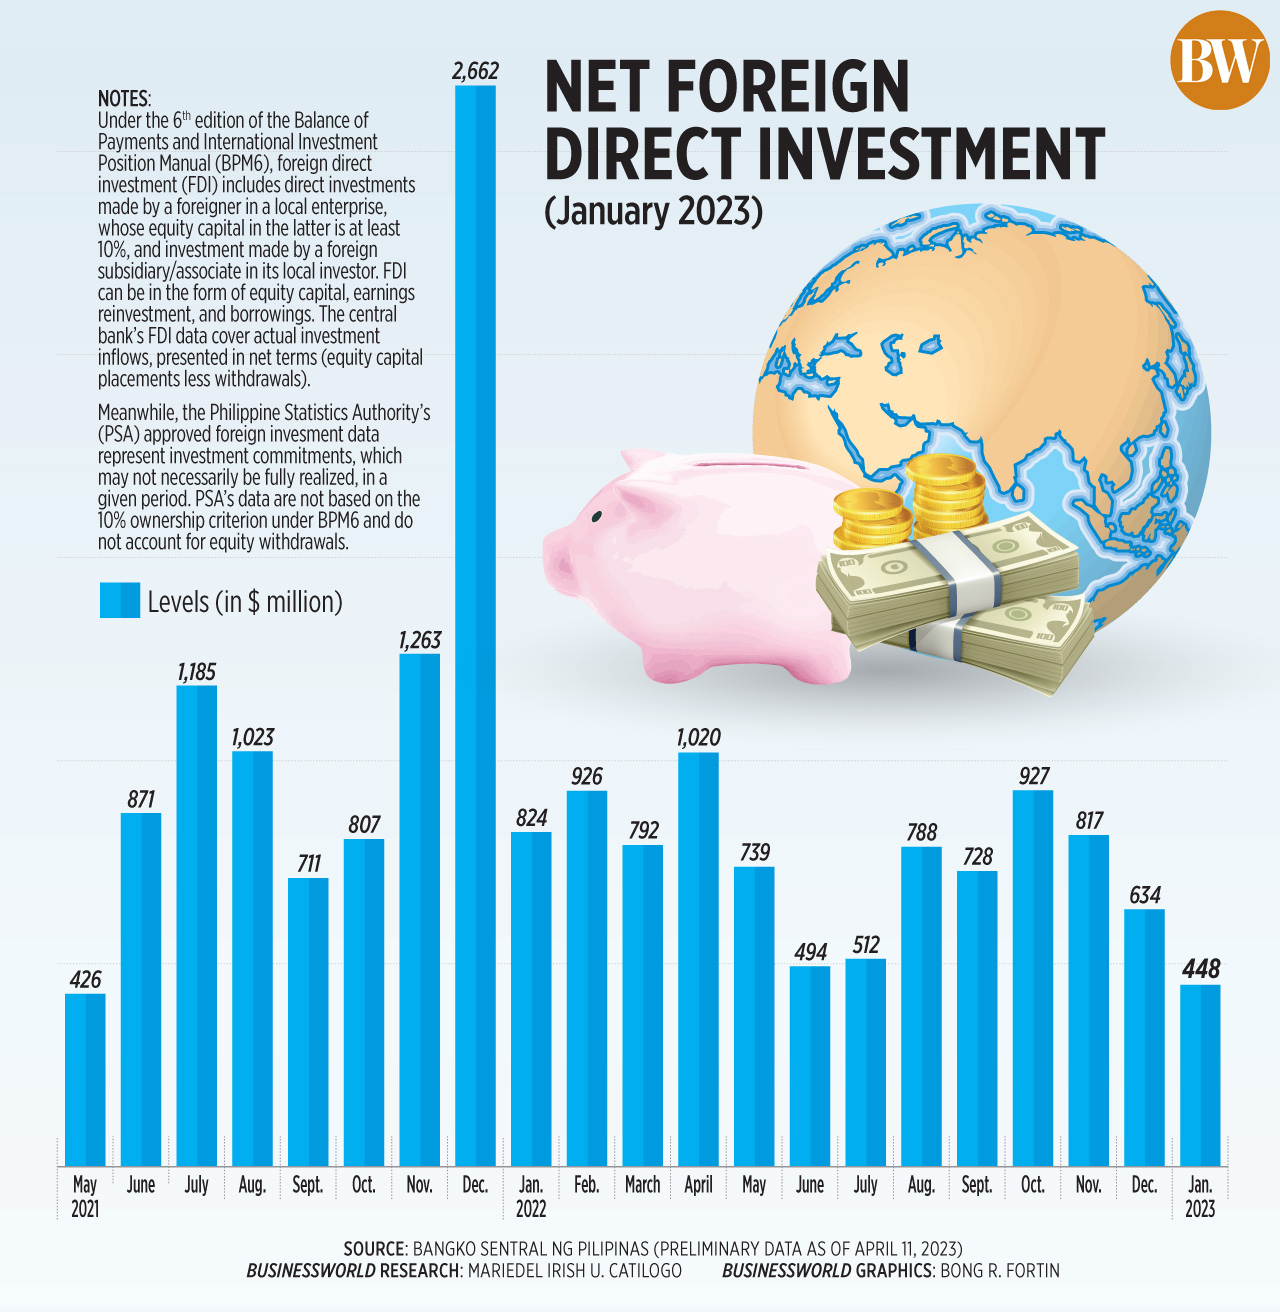 Net foreign direct investment